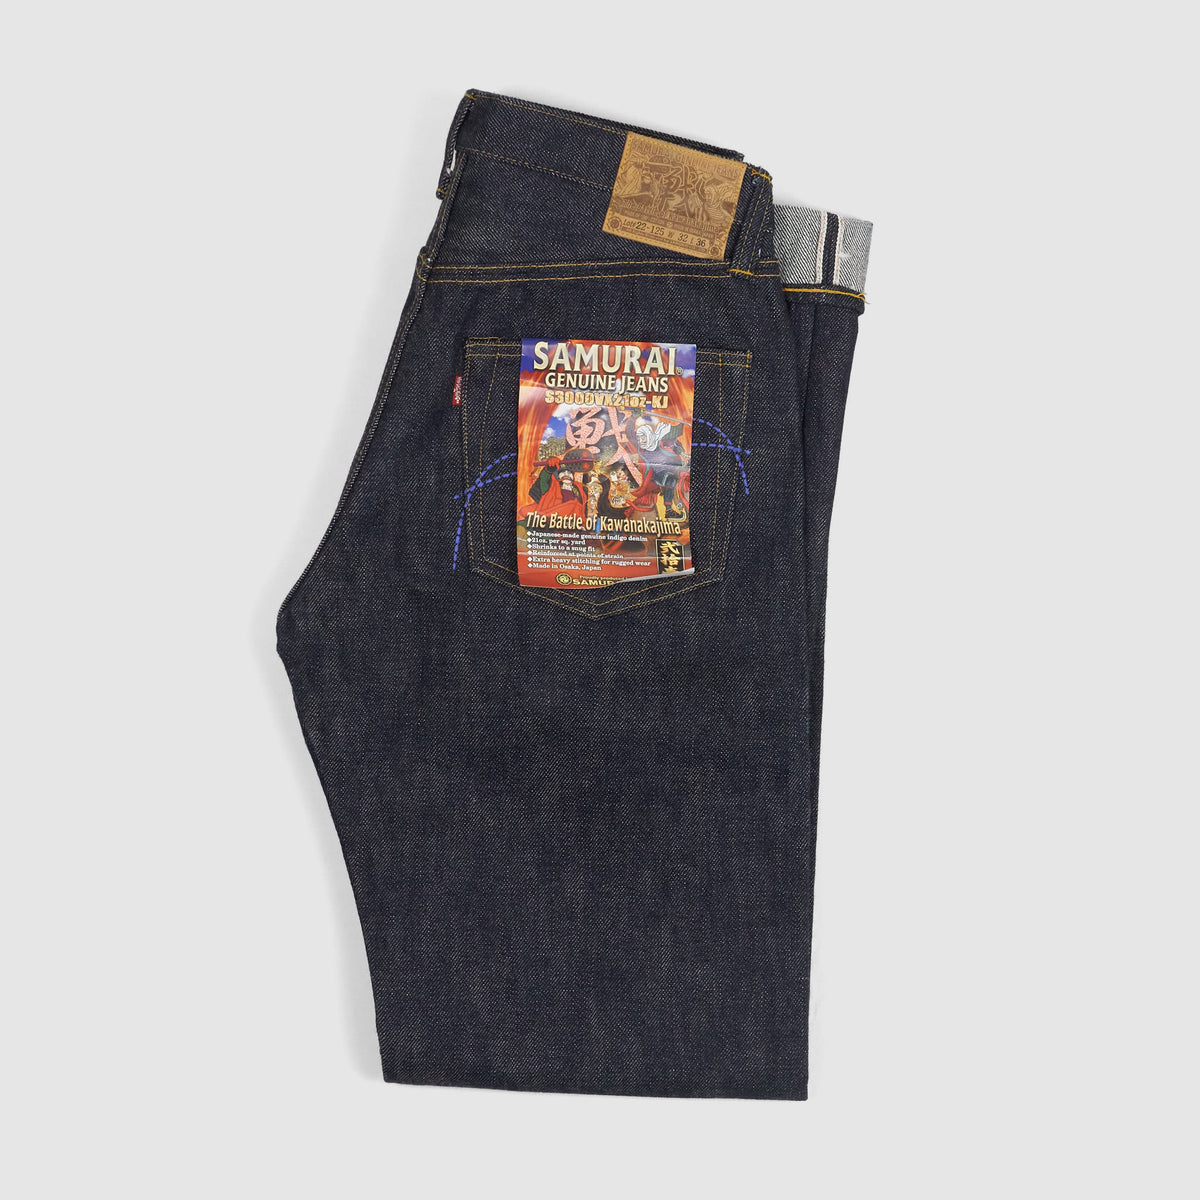 Samurai Jeans Limited 21oz Printed Stitching Jeans S3000